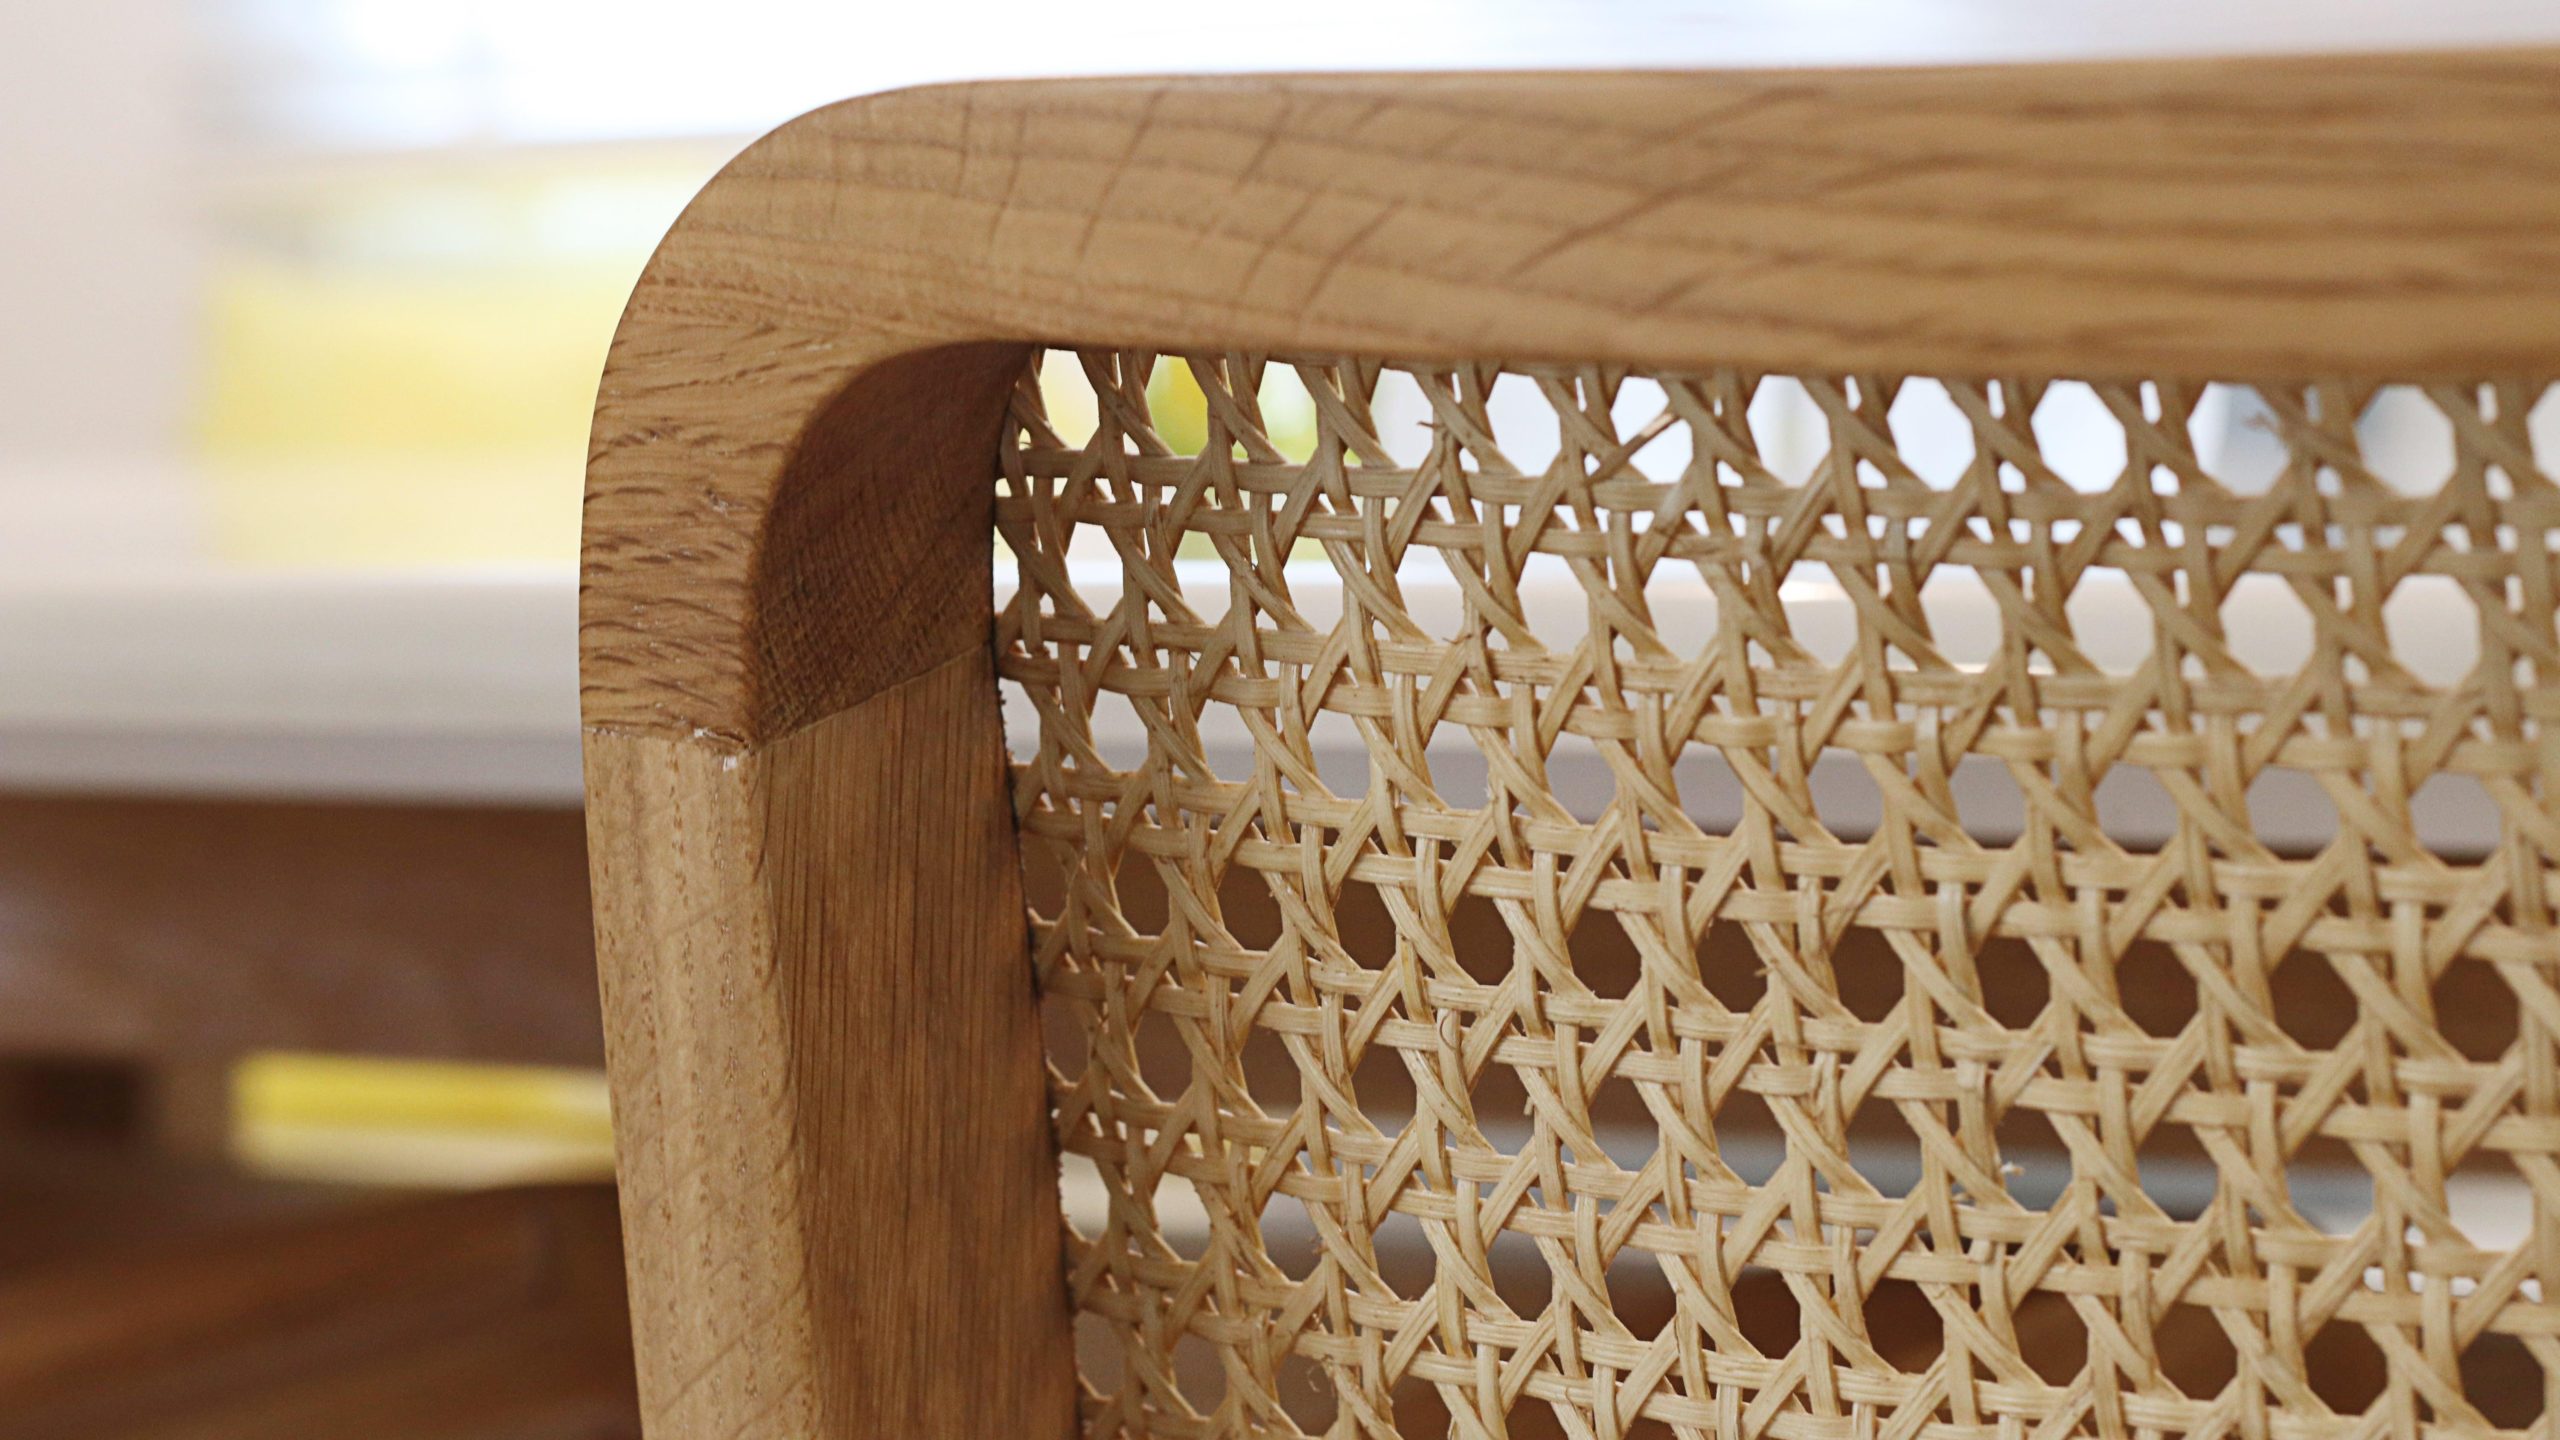 Upgrade Your Boring Old Furniture With Cane Webbing